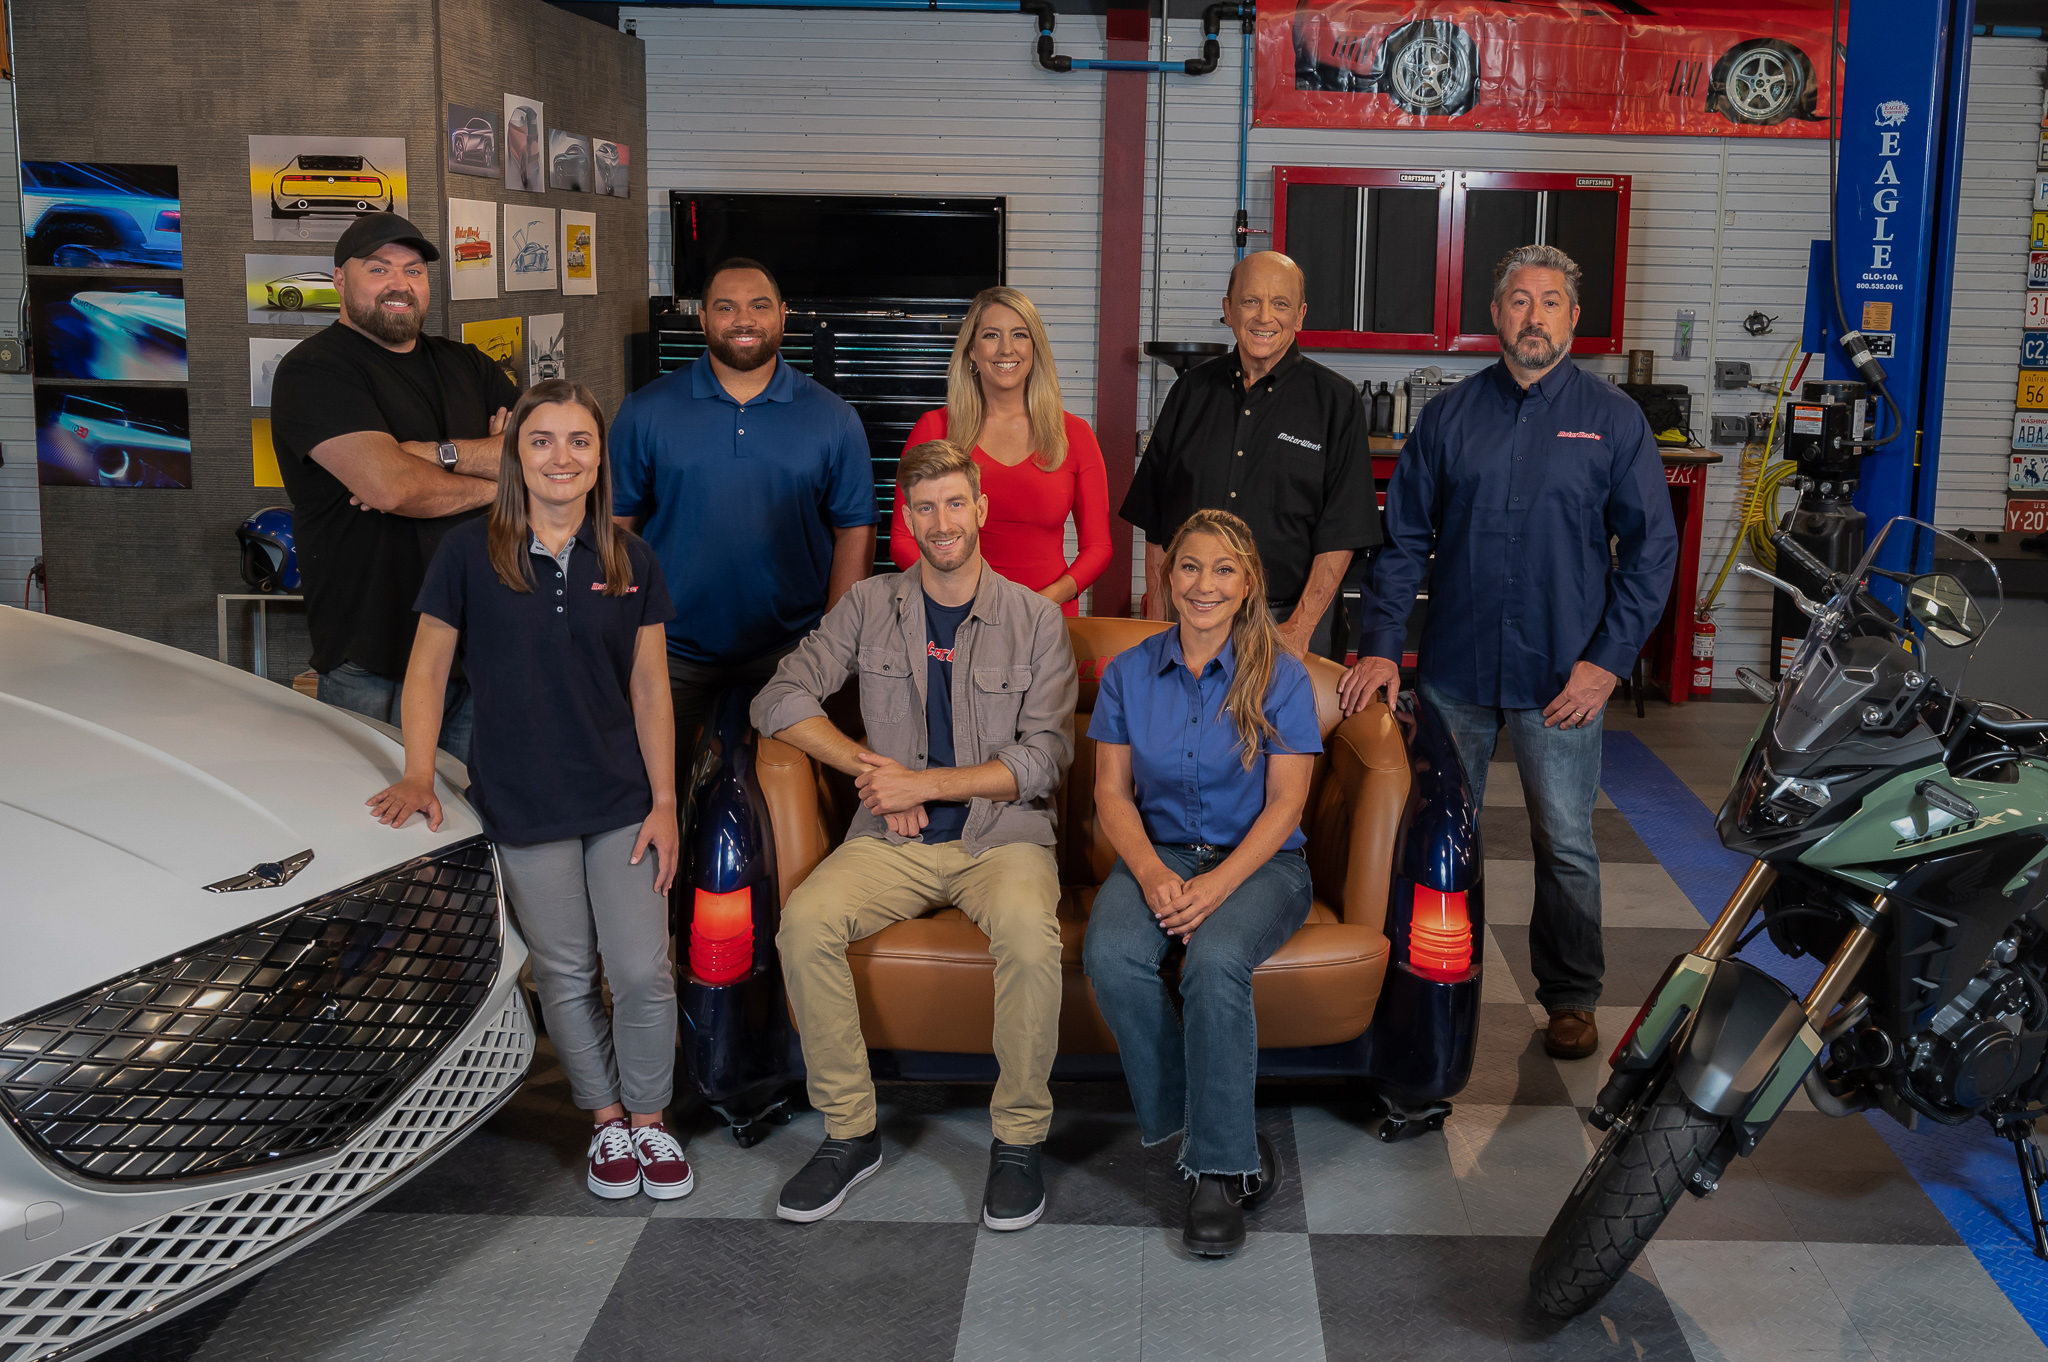 MotorWeek Season 42 to “Put waste in its place” and introduce new “Your Drive” car care experts